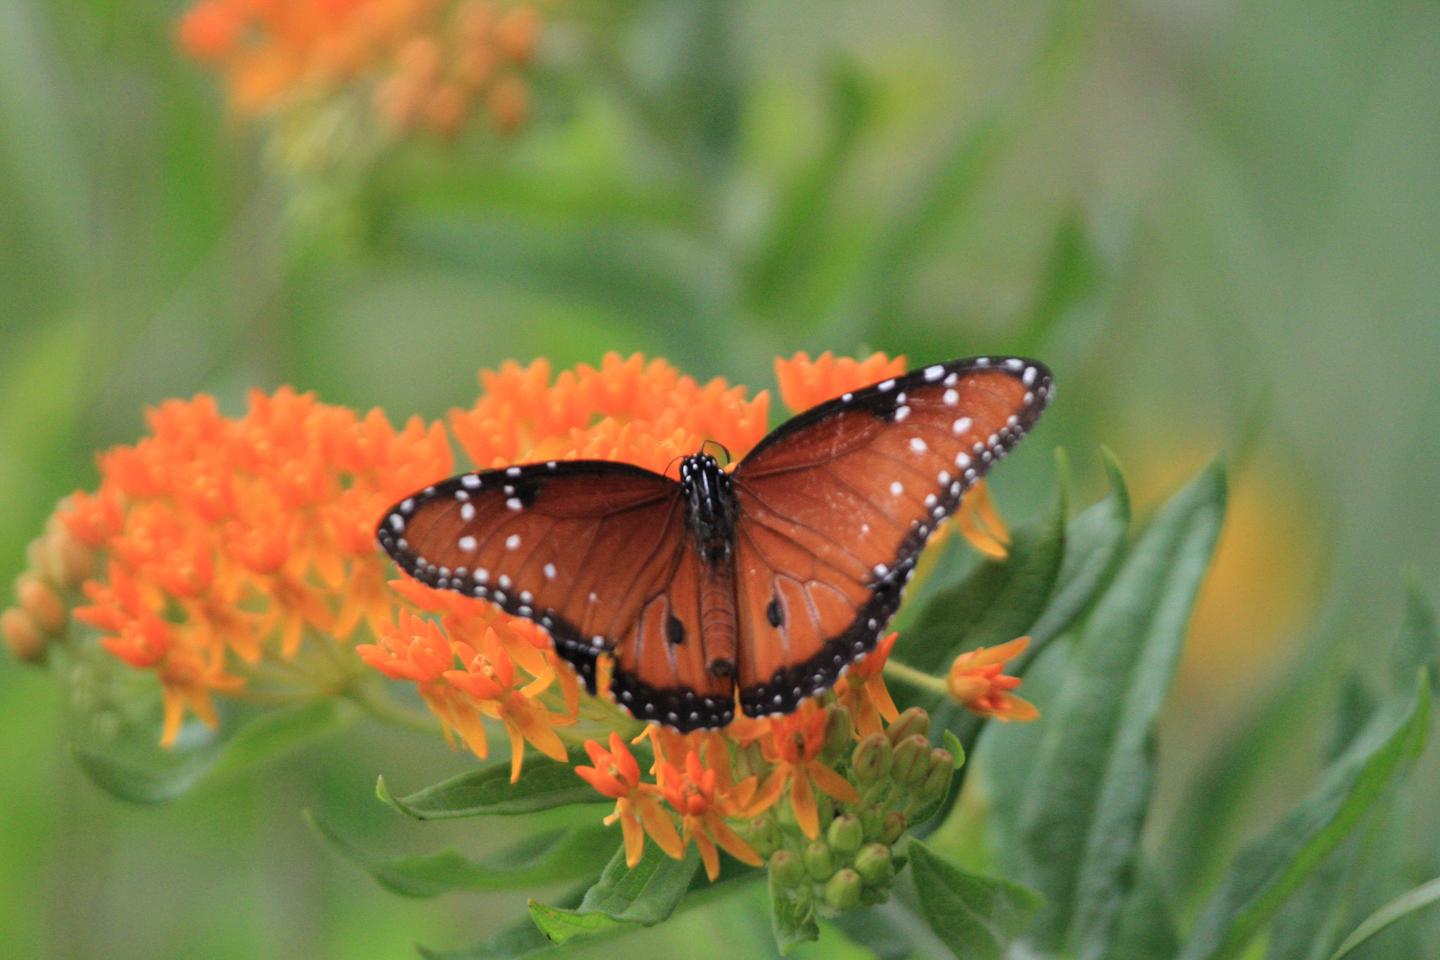 A magnificent orange butterfly resting on stunning orange flowers.